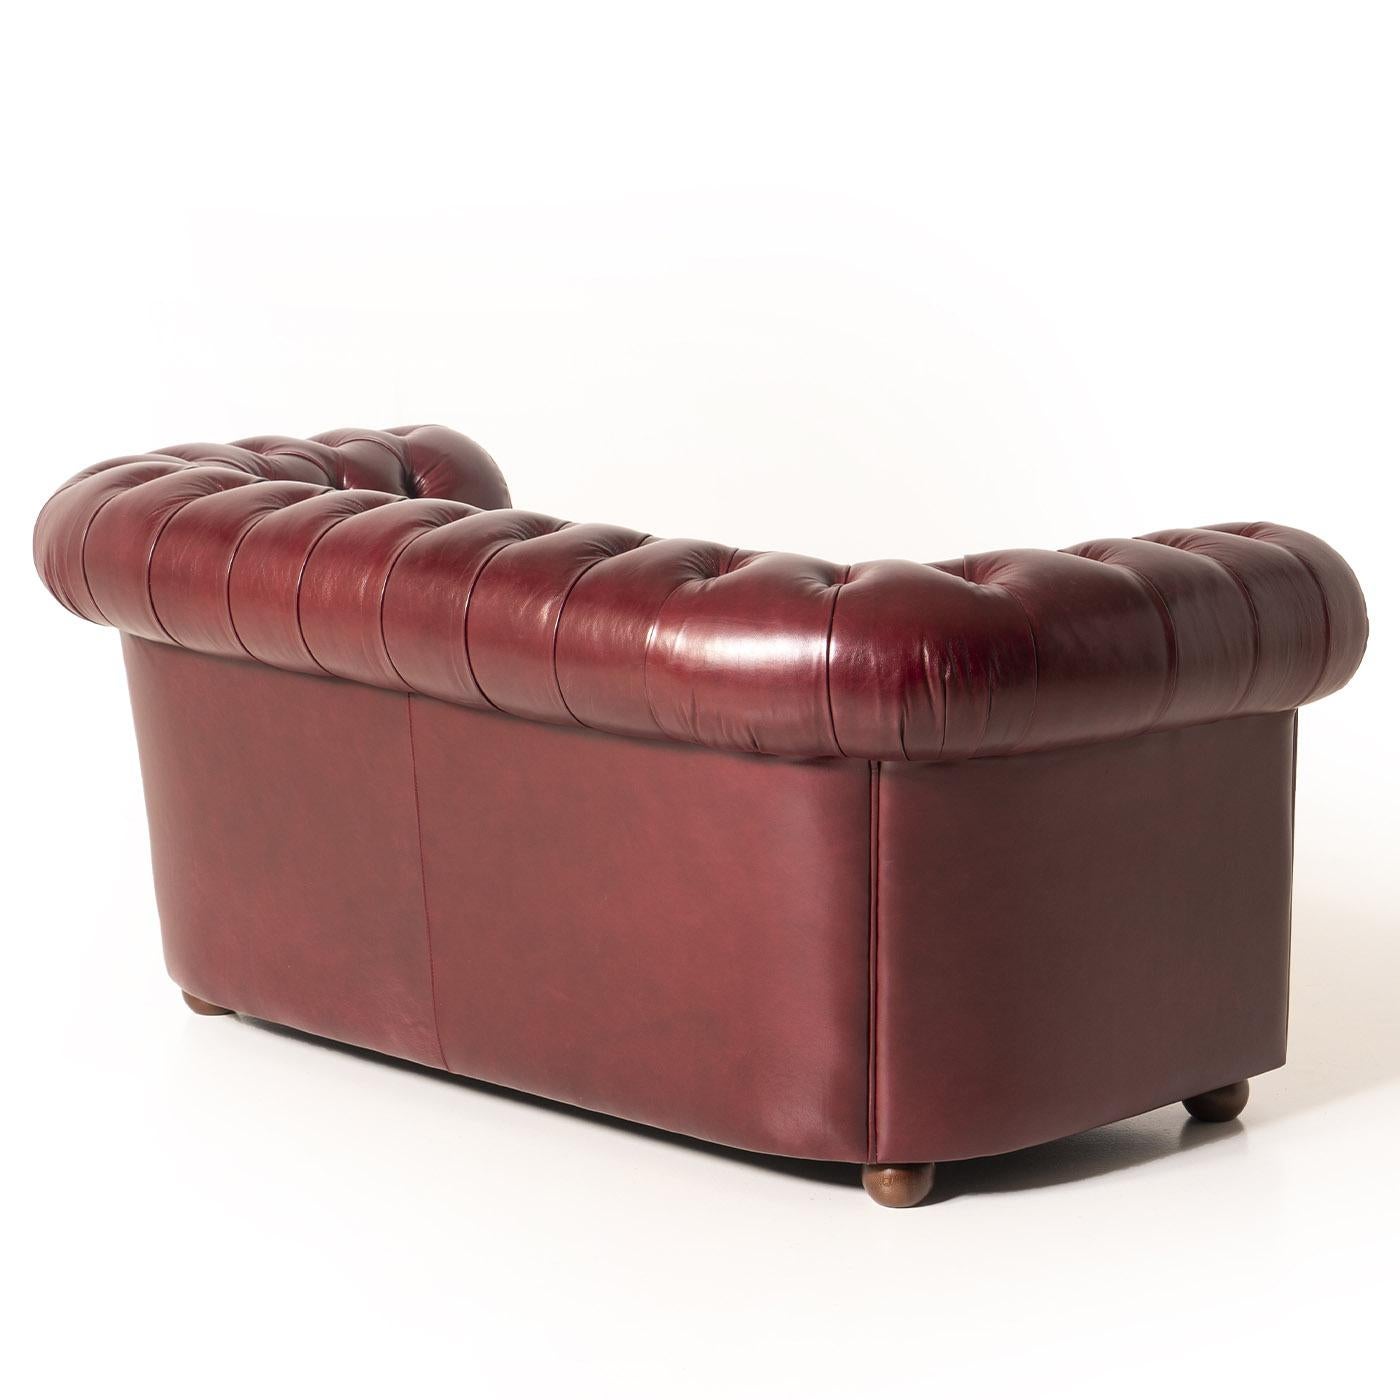 The Chesterfield sofa is an icon of the world of the leather lounge. A Mantellassi Chesterfield sofa is an eternal artwork that you will take into your home and admire every day for the rest of your life.